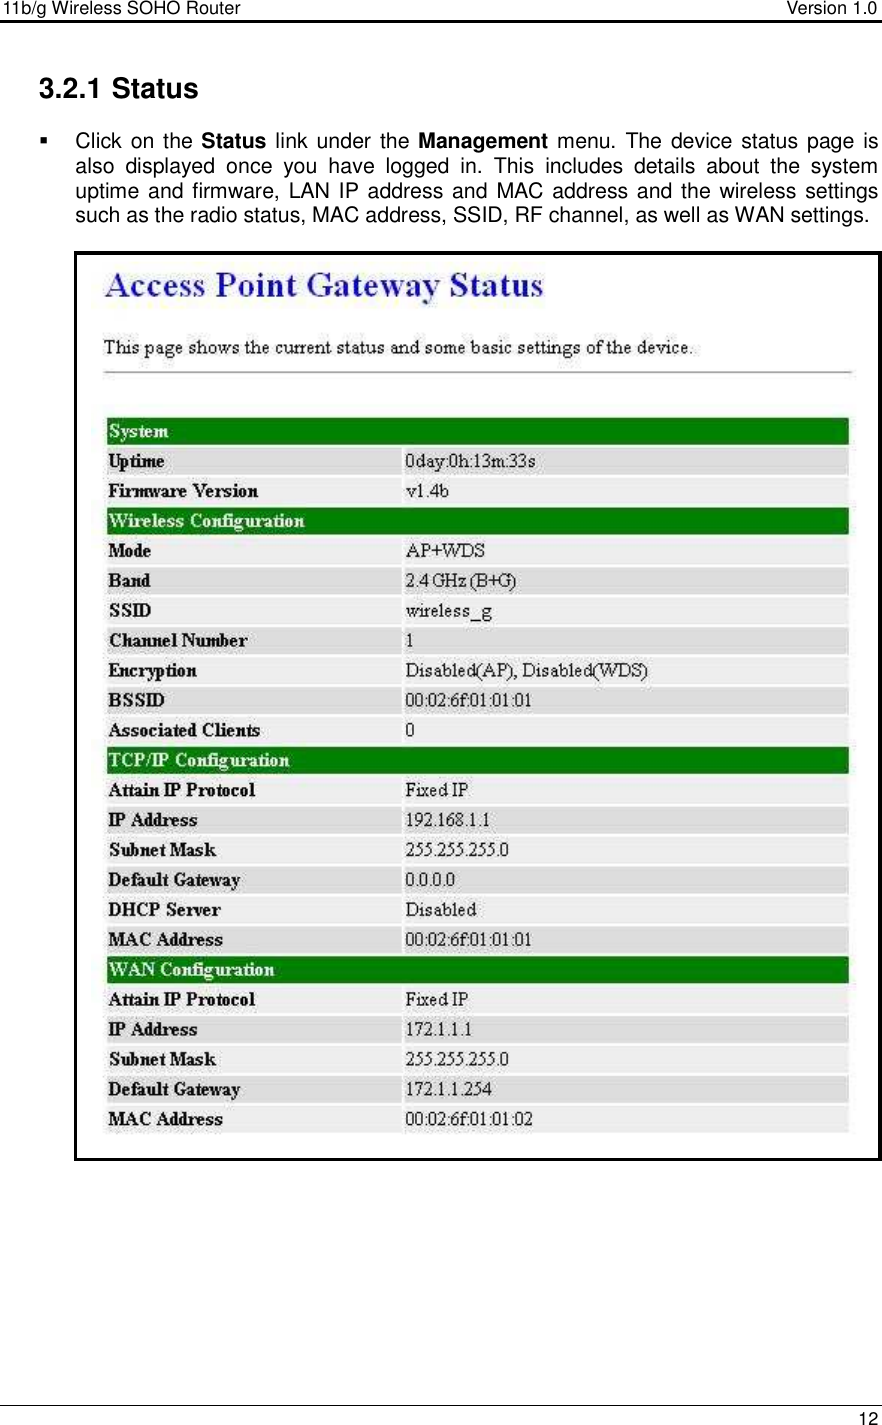 11b/g Wireless SOHO Router                                     Version 1.0    12  3.2.1 Status   Click on the Status link under the Management menu. The  device status  page is also  displayed  once  you  have  logged  in.  This  includes  details  about  the  system uptime and firmware, LAN IP address and MAC address and the wireless settings such as the radio status, MAC address, SSID, RF channel, as well as WAN settings.                                               